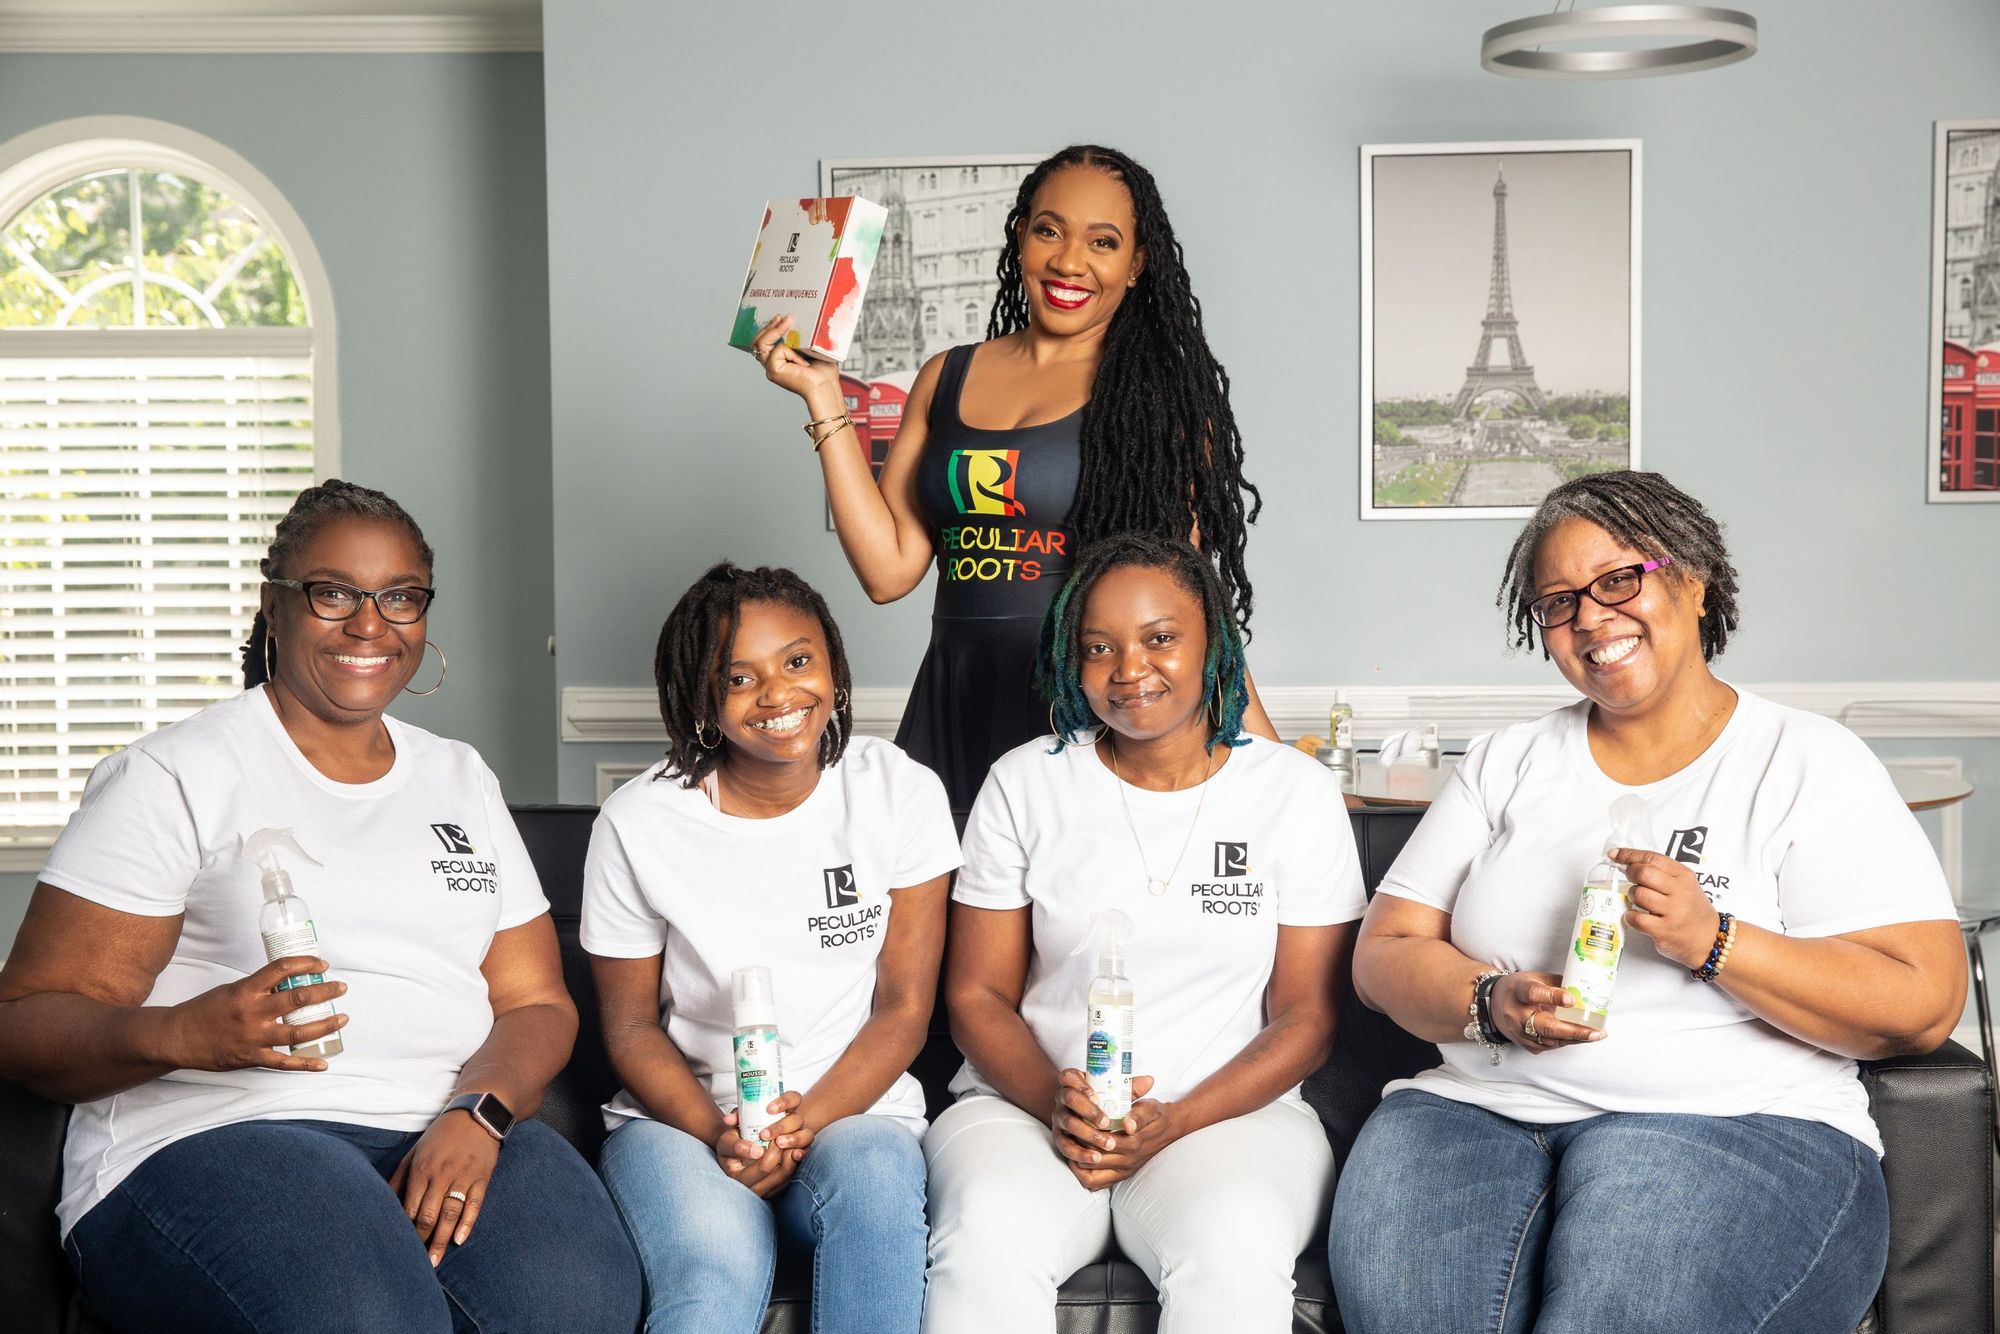                      Black-Owned Locs Brand, Peculiar Roots, Wins Sally Beauty Supply Business Grant                             
                     